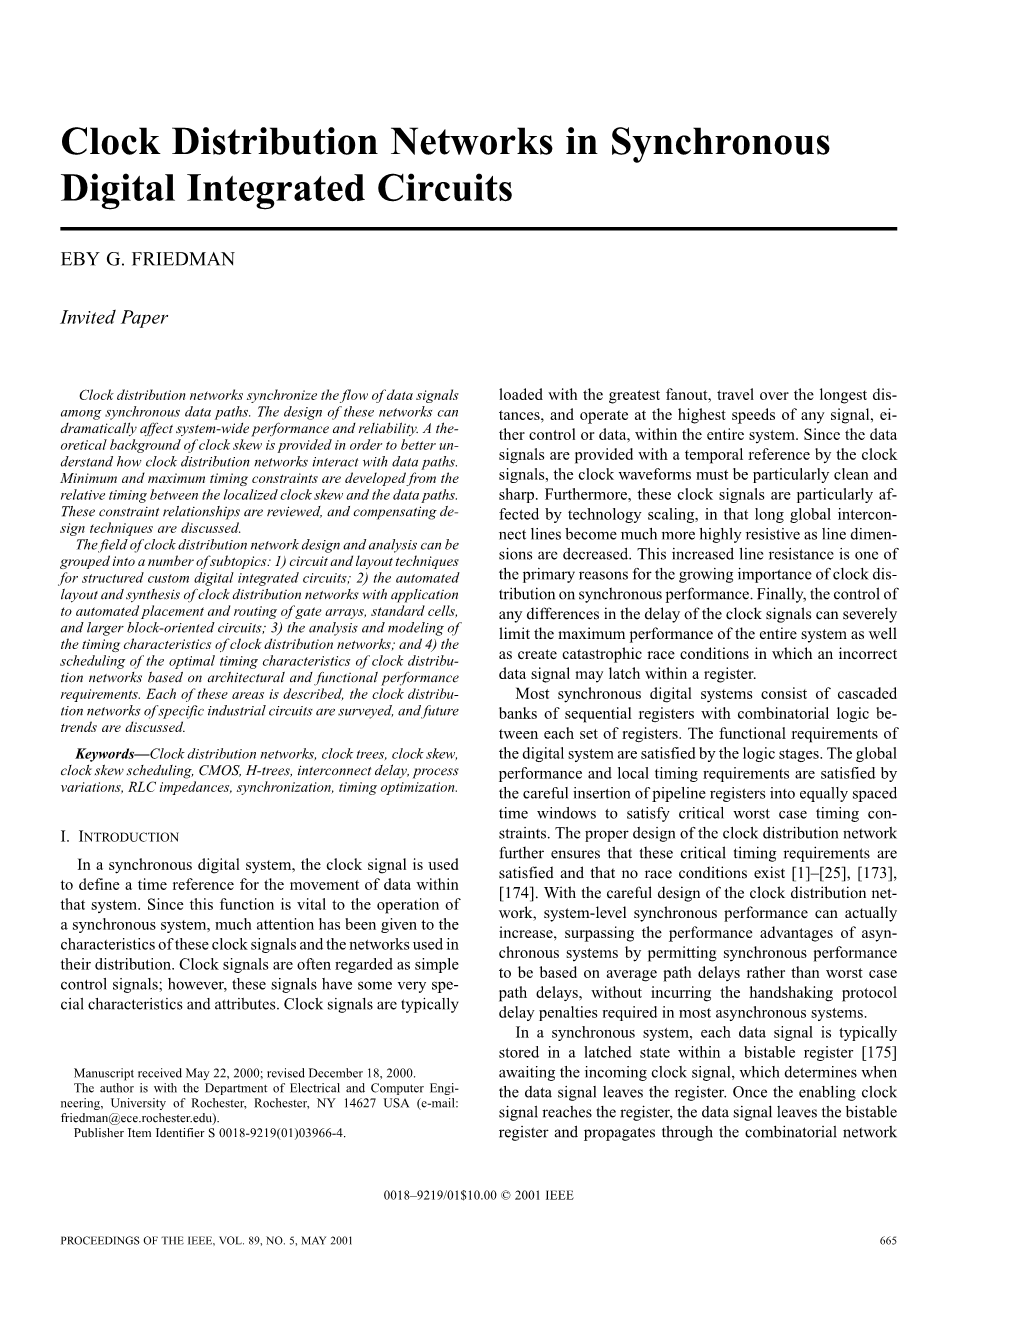 Clock Distribution Networks in Synchronous Digital Integrated Circuits